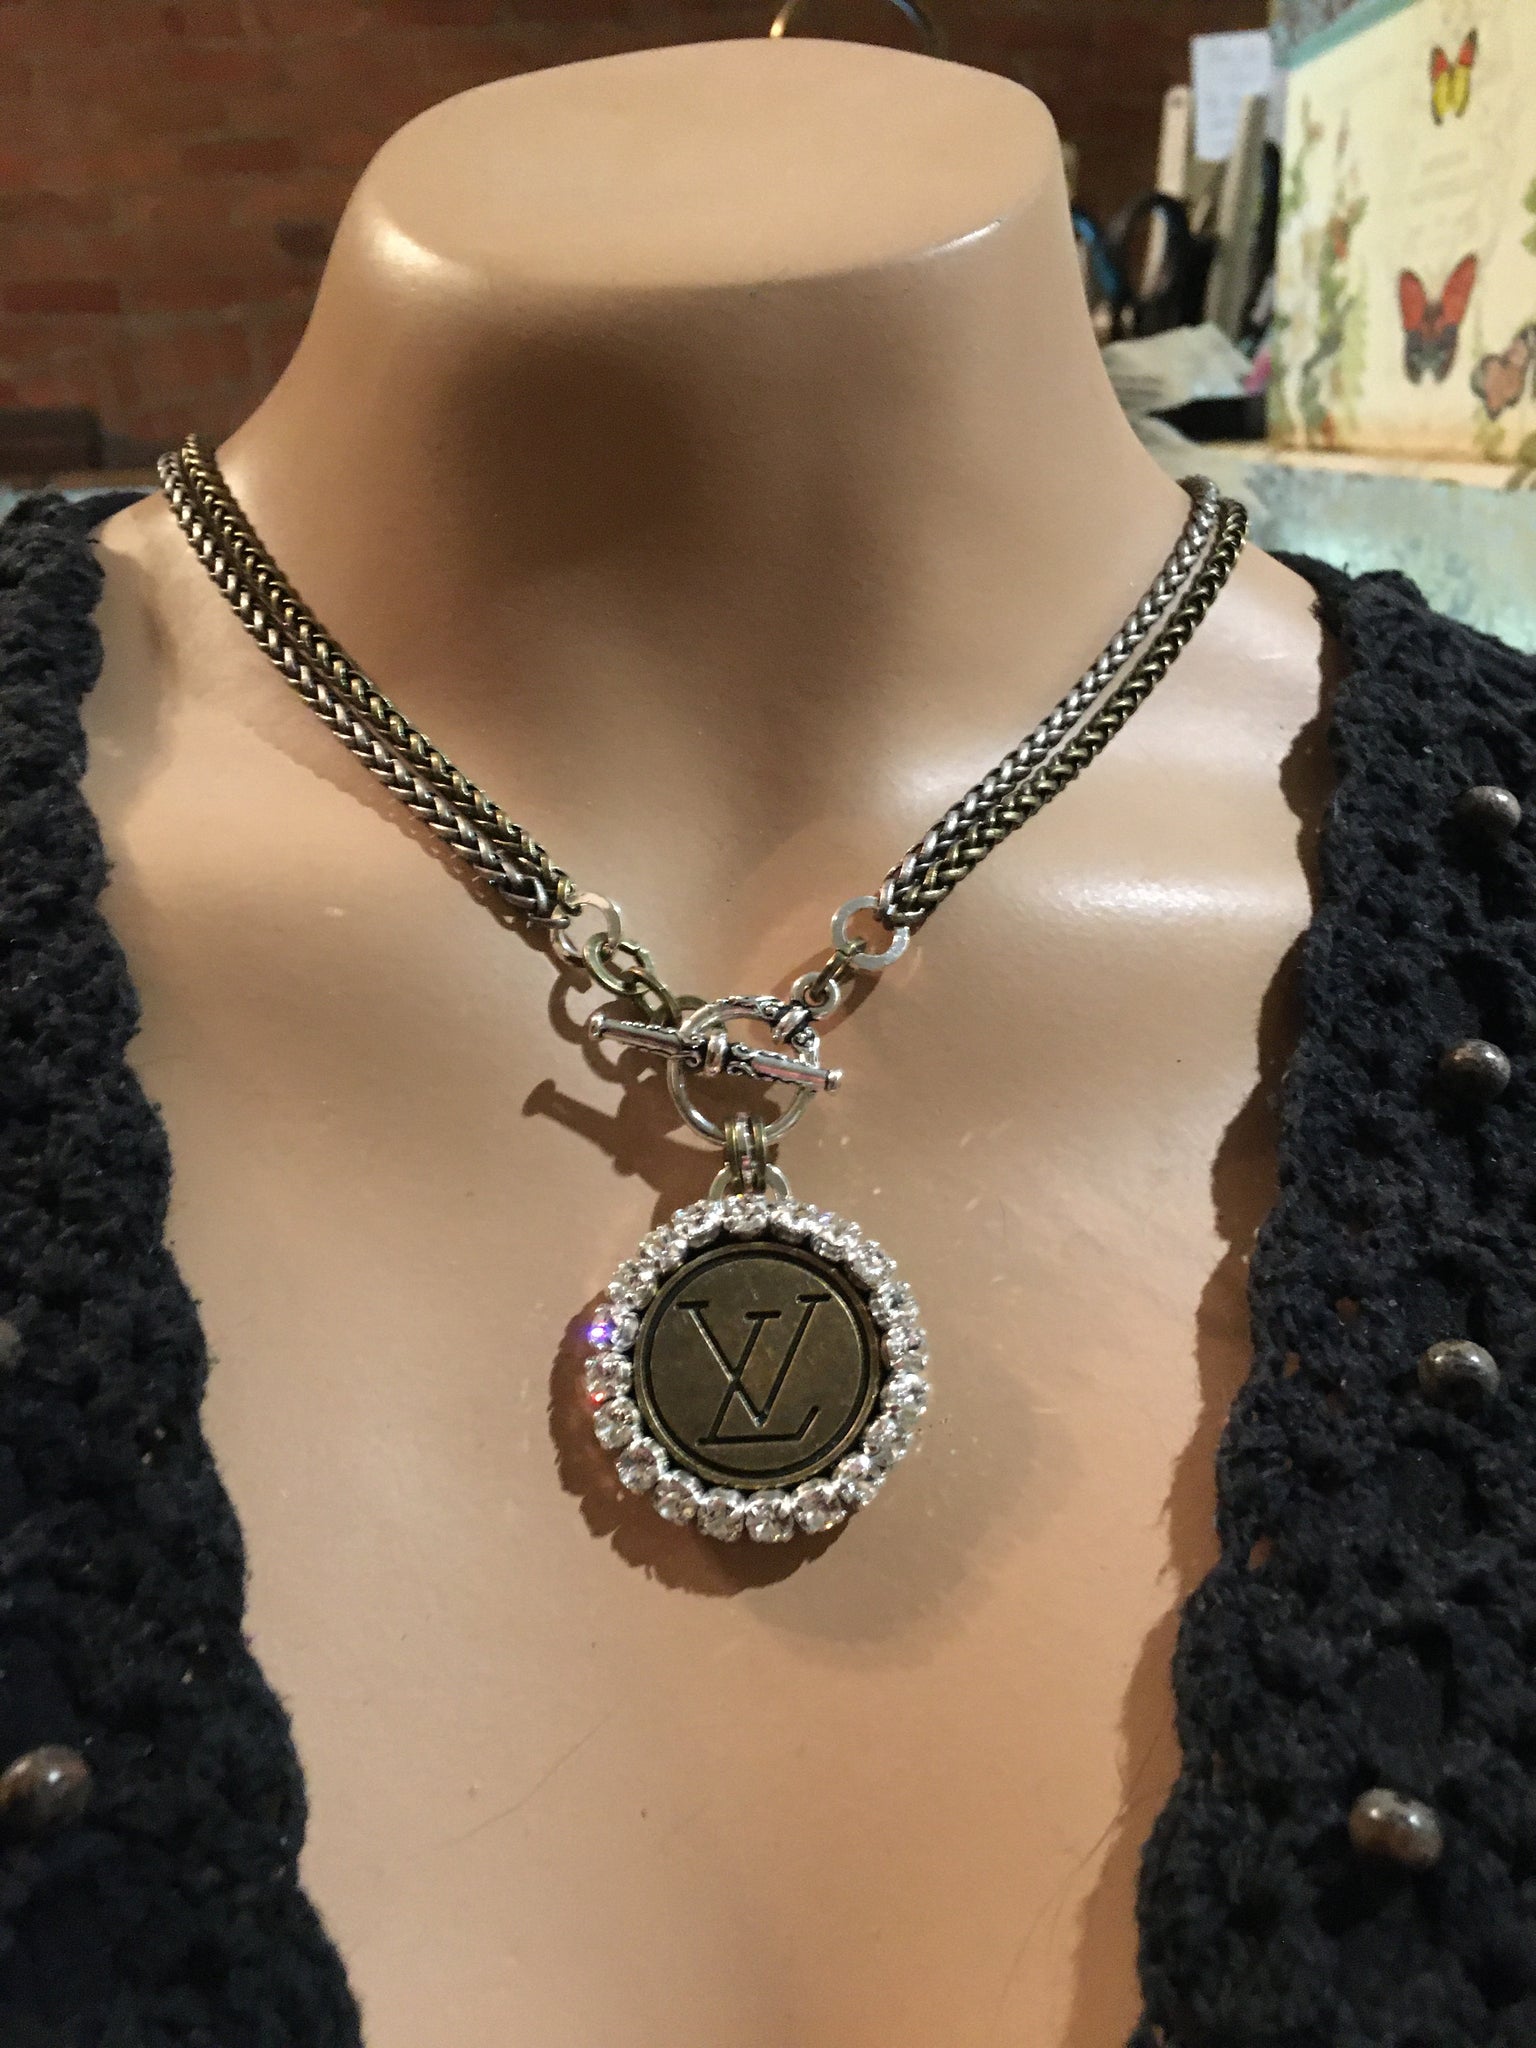 1” Louis Vuitton Button Necklace - Long or Short (Only 1 Left) –  suewoojewels